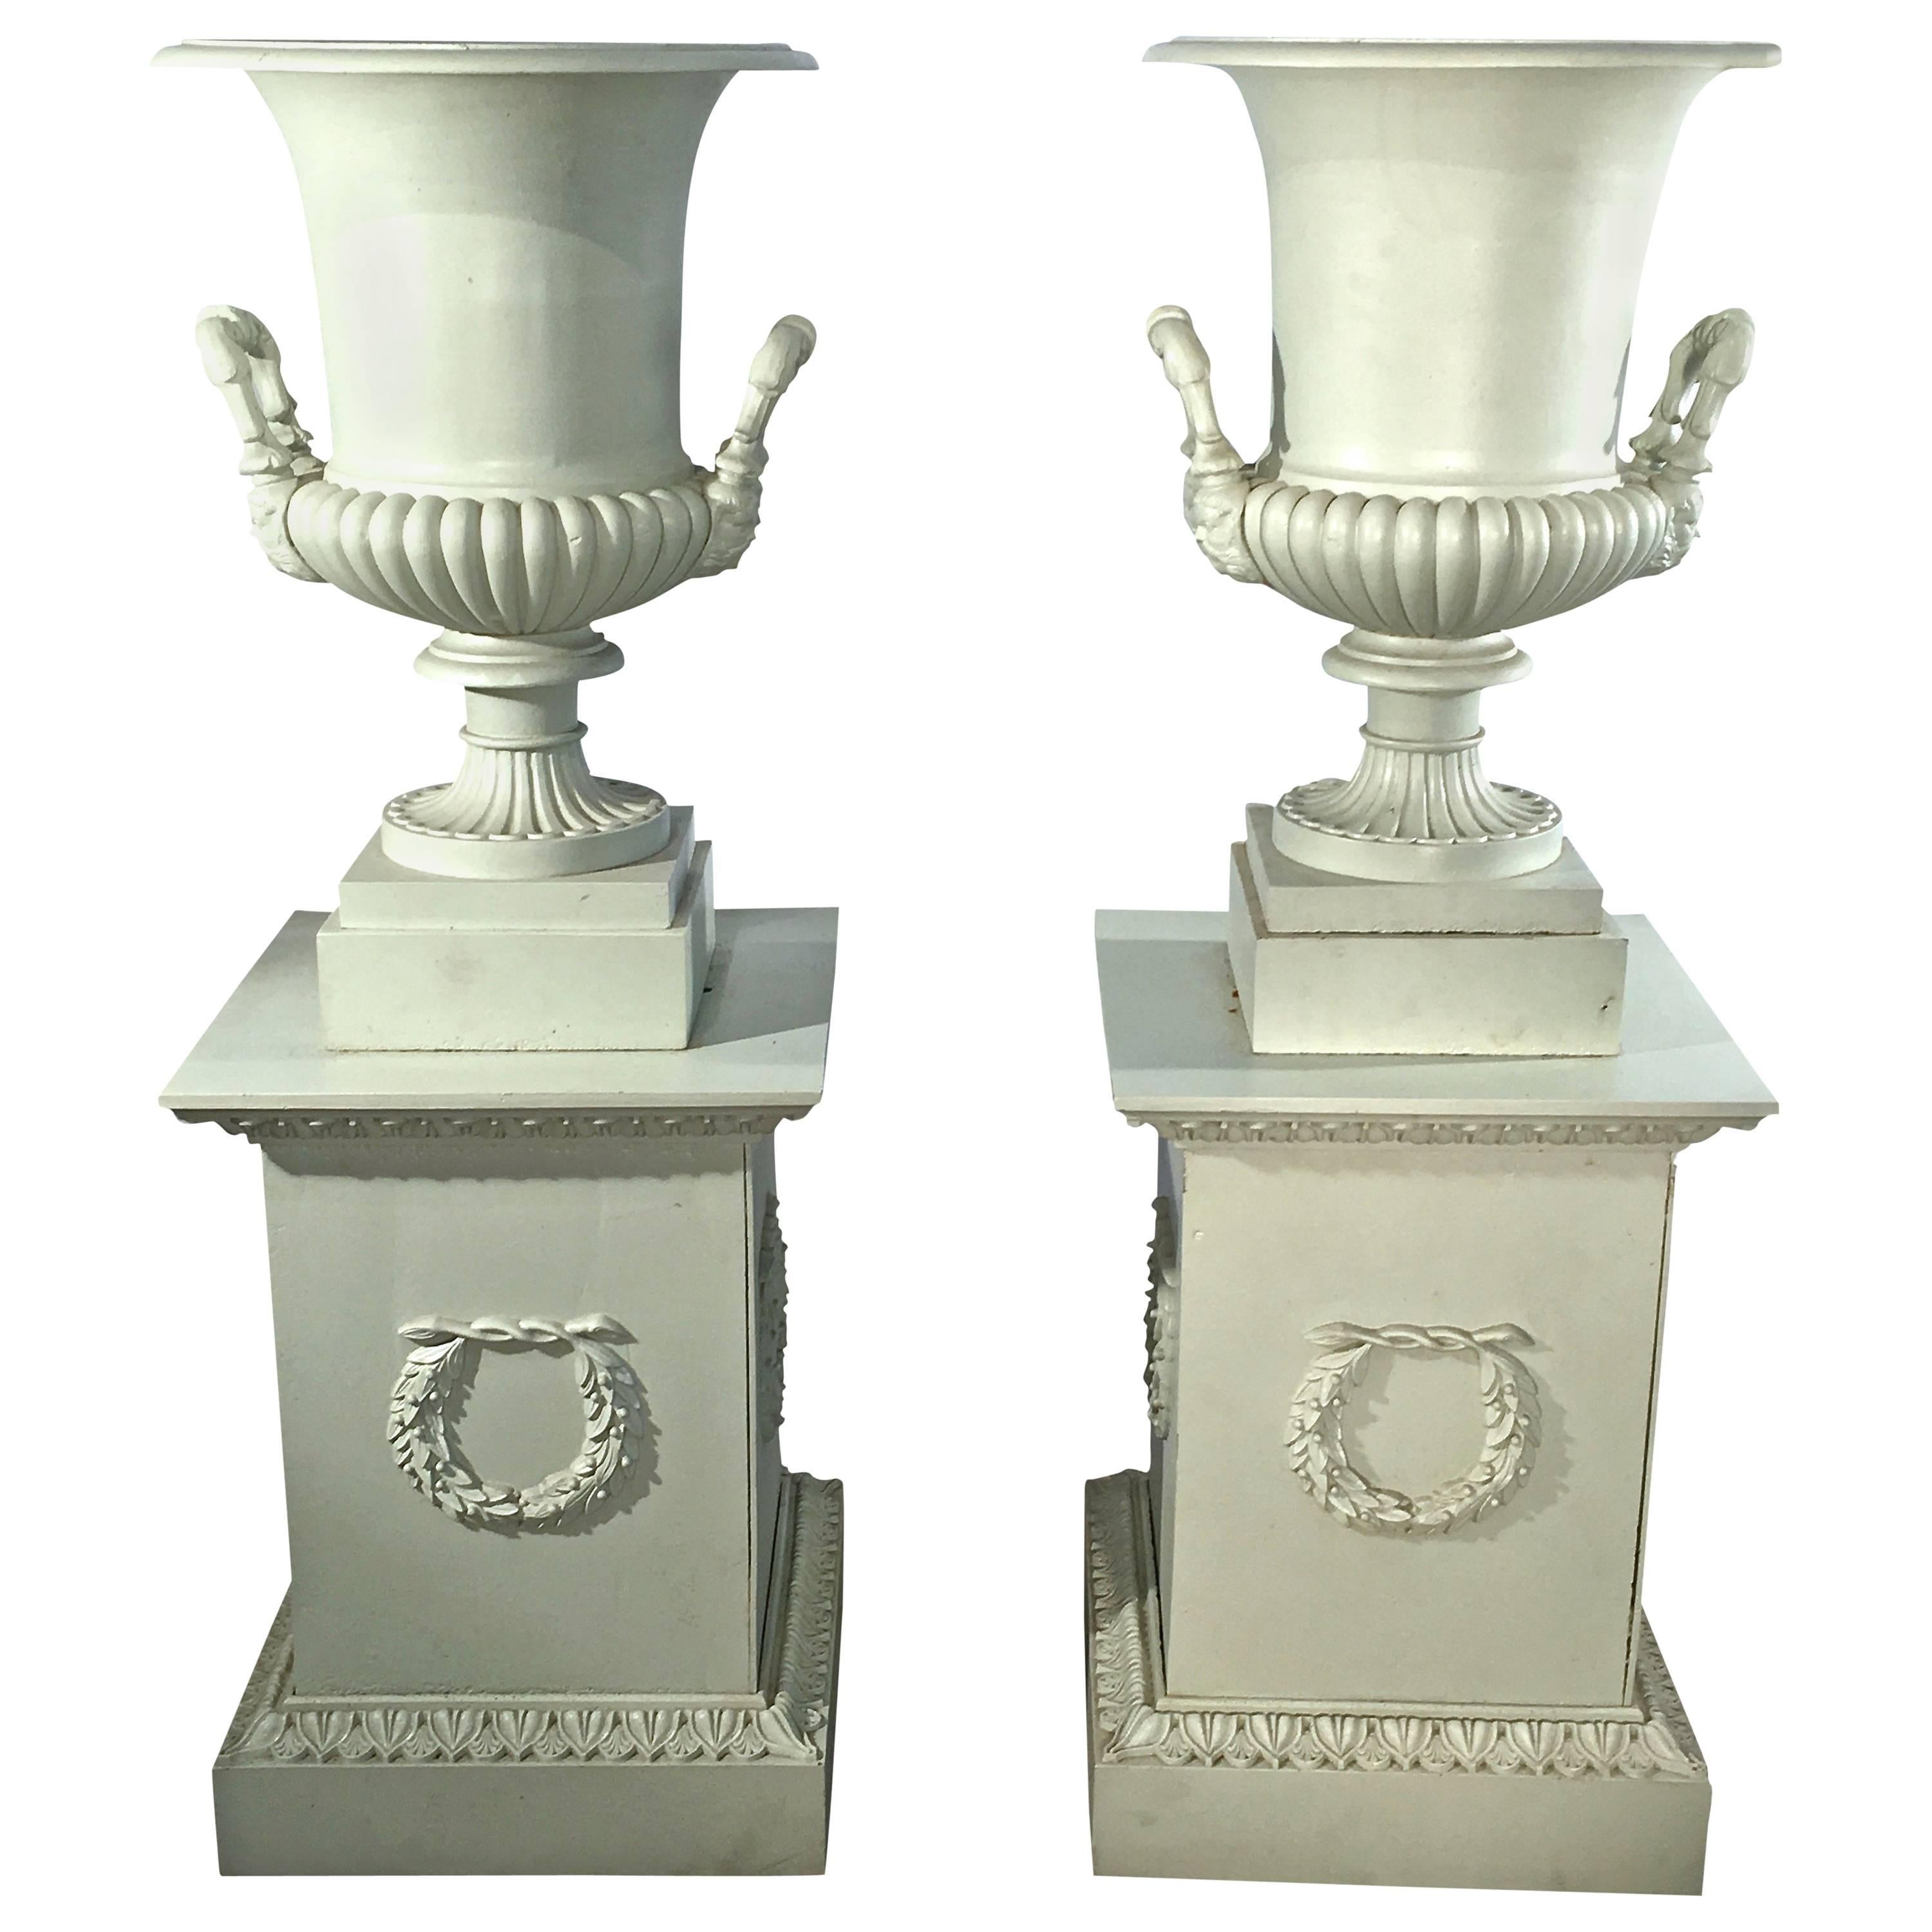 Pair of 19th Century French Cast Iron Masked Urns on Tall Plinths